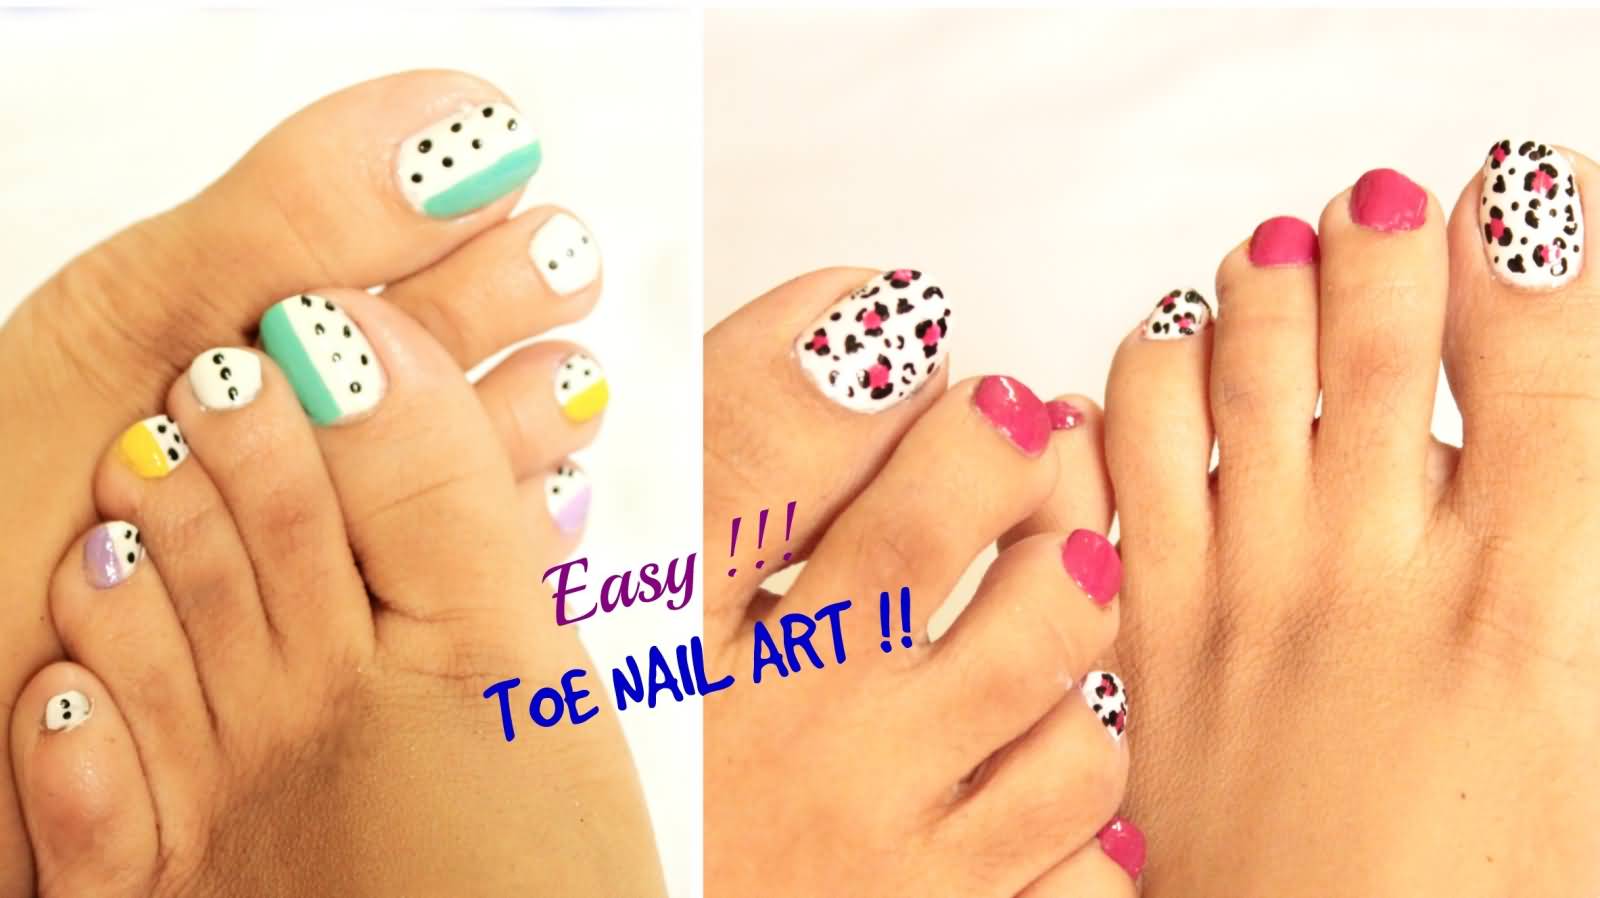 7. Simple and Stylish Toe Nail Designs for Every Day - wide 11